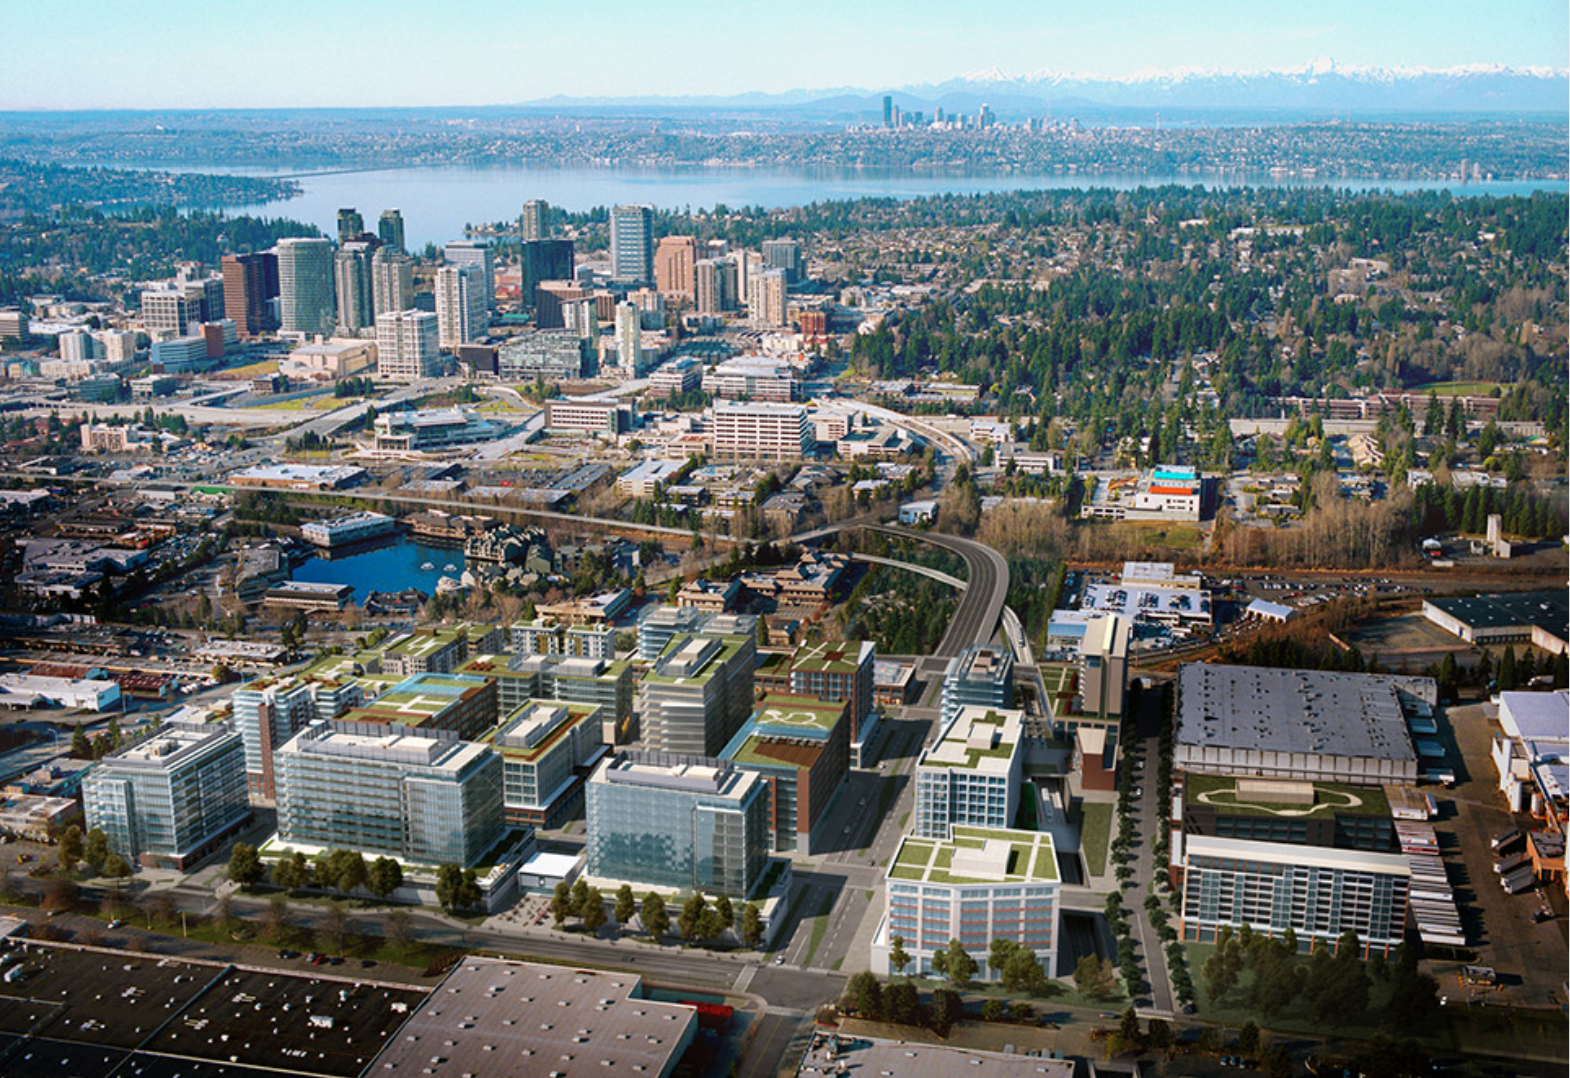 Spring District in Bellevue Awarded LEED Certification for Sustainable, Well-Connected Neighborhoods